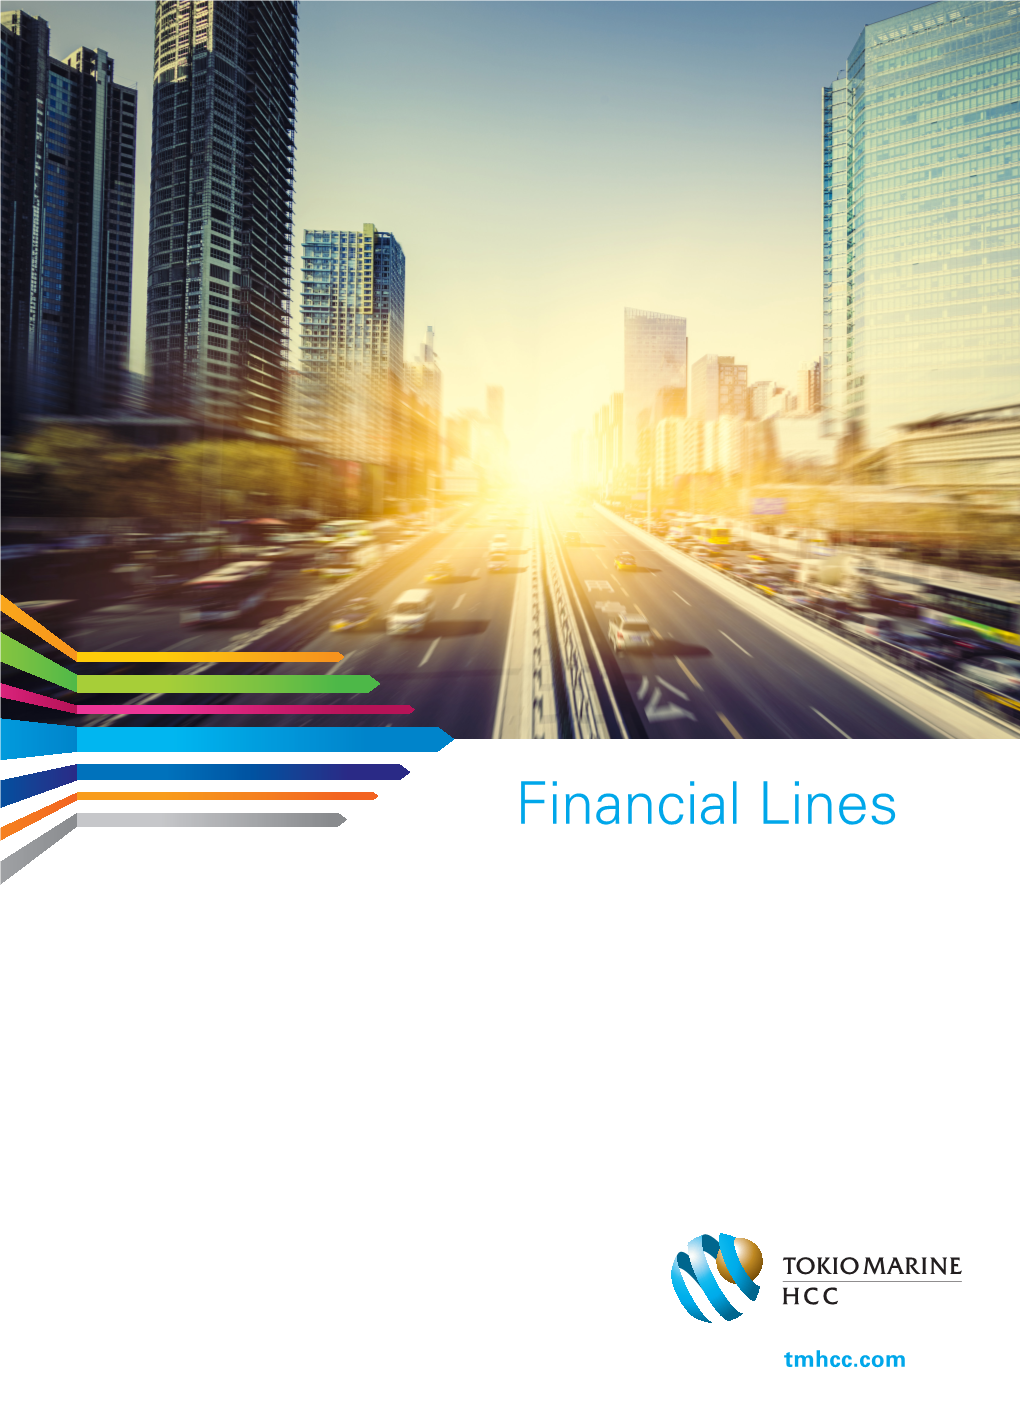 Financial Lines